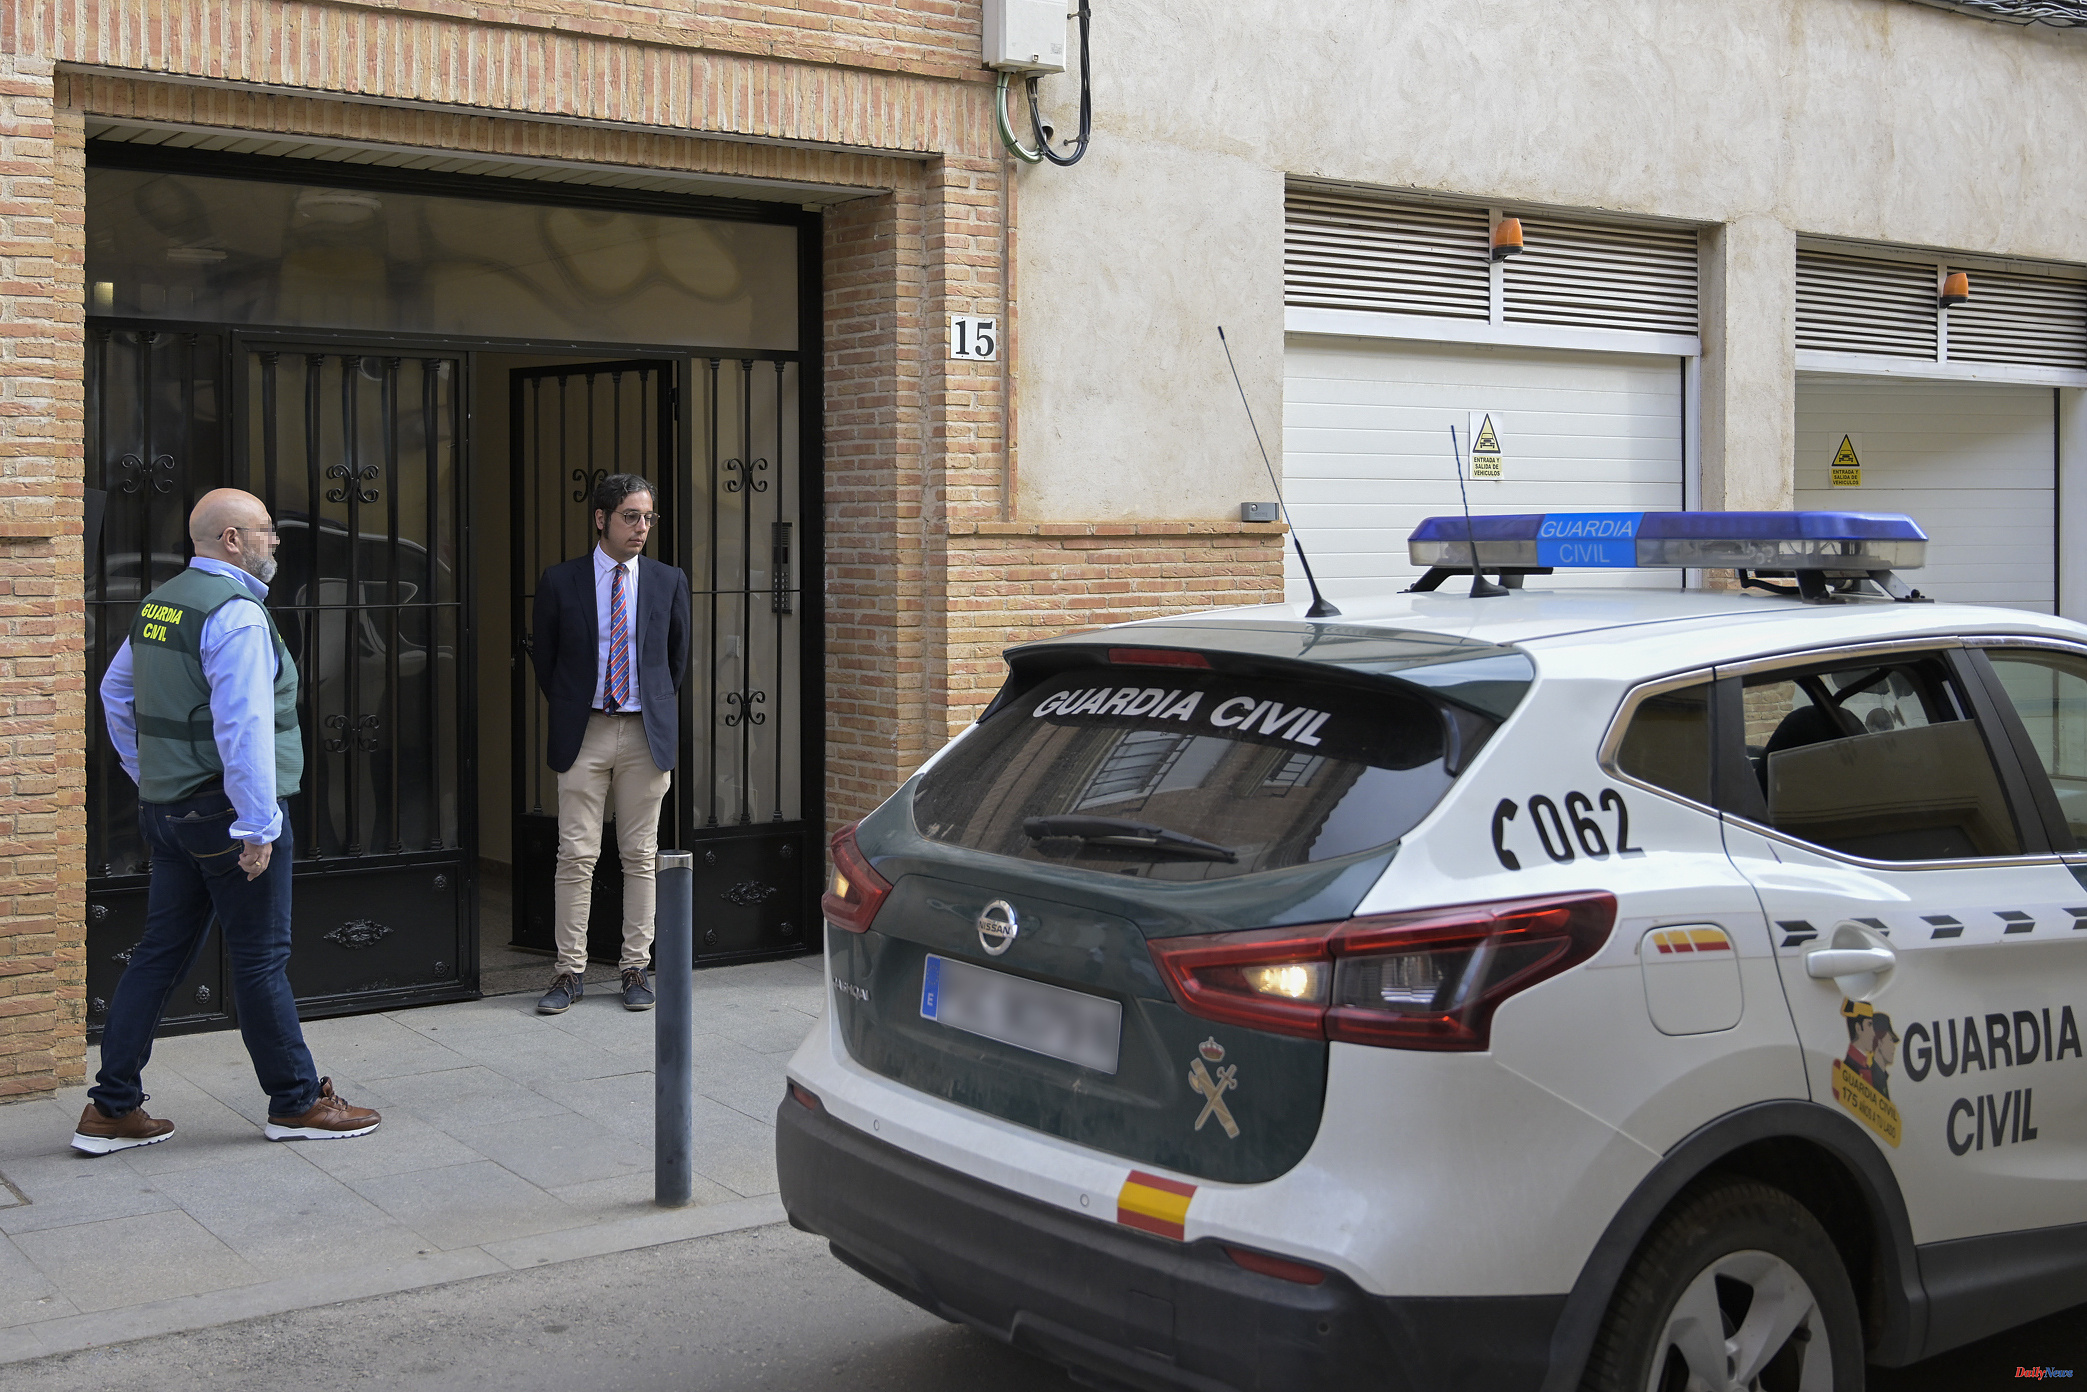 Toledo The head of the Ocaña Civil Guard, among the six arrested for money laundering and drug trafficking in a hostess club